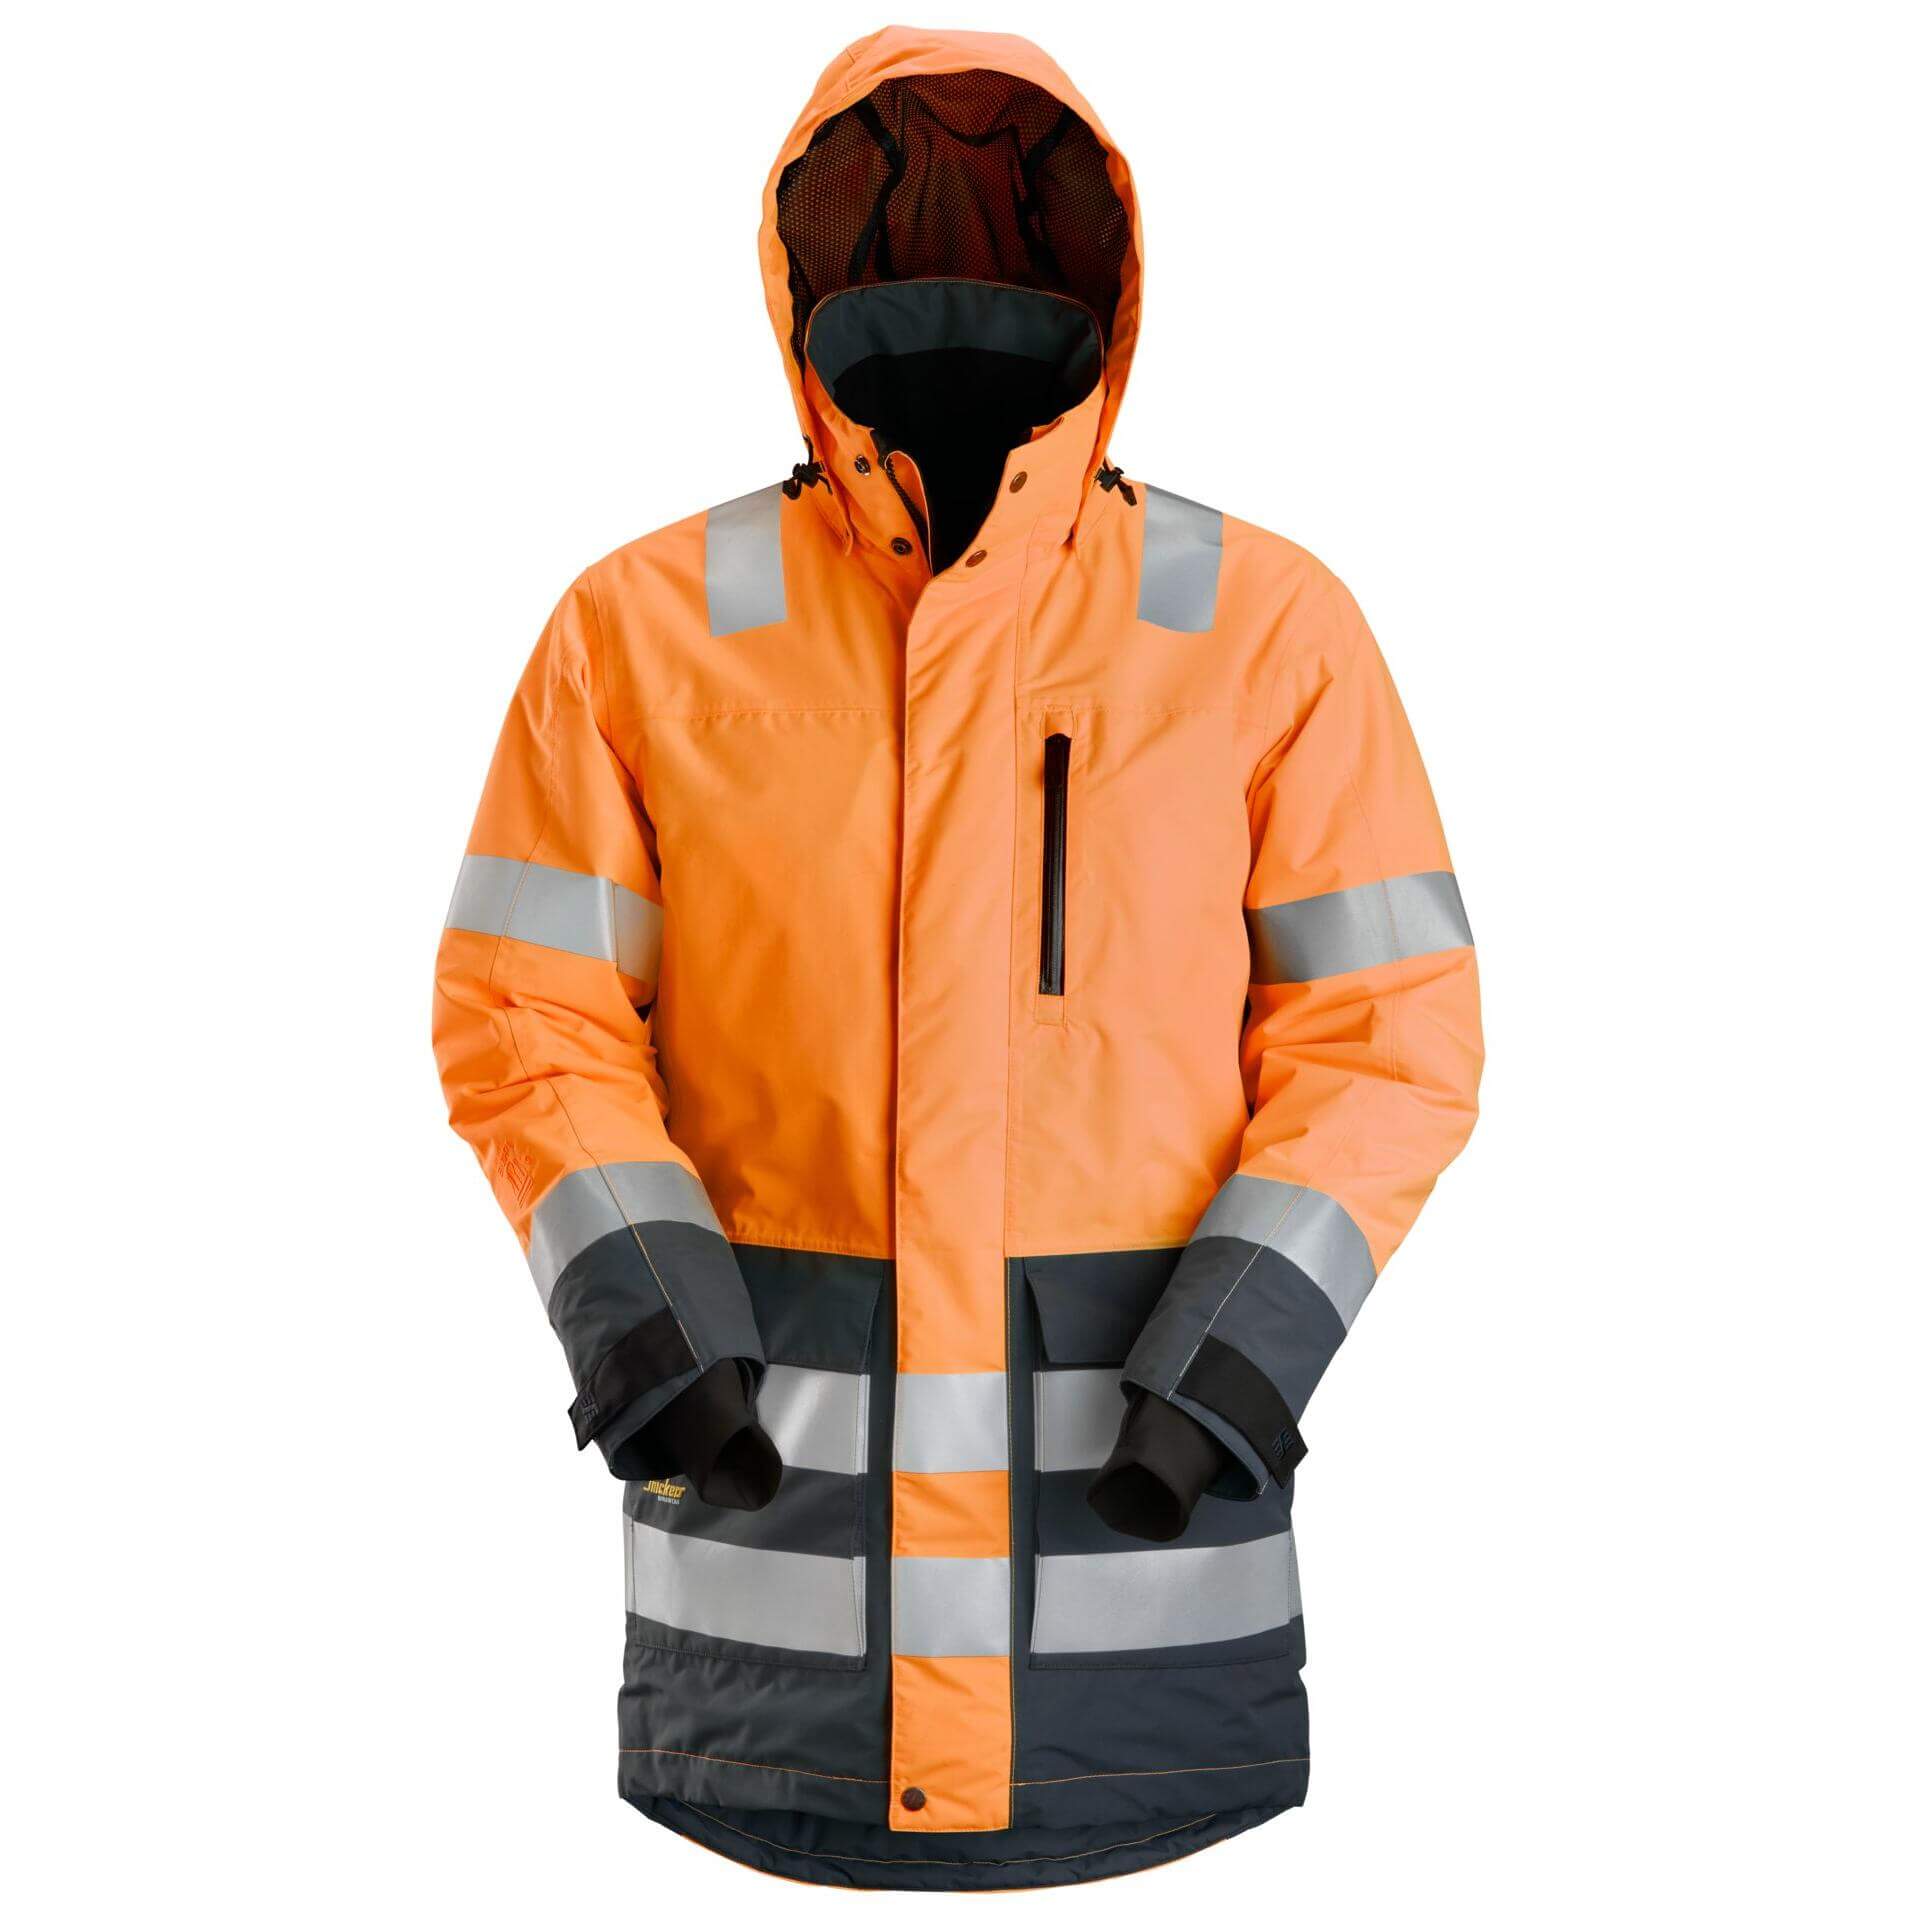 Snickers Work Jackets: Why Quality Matters - HLS